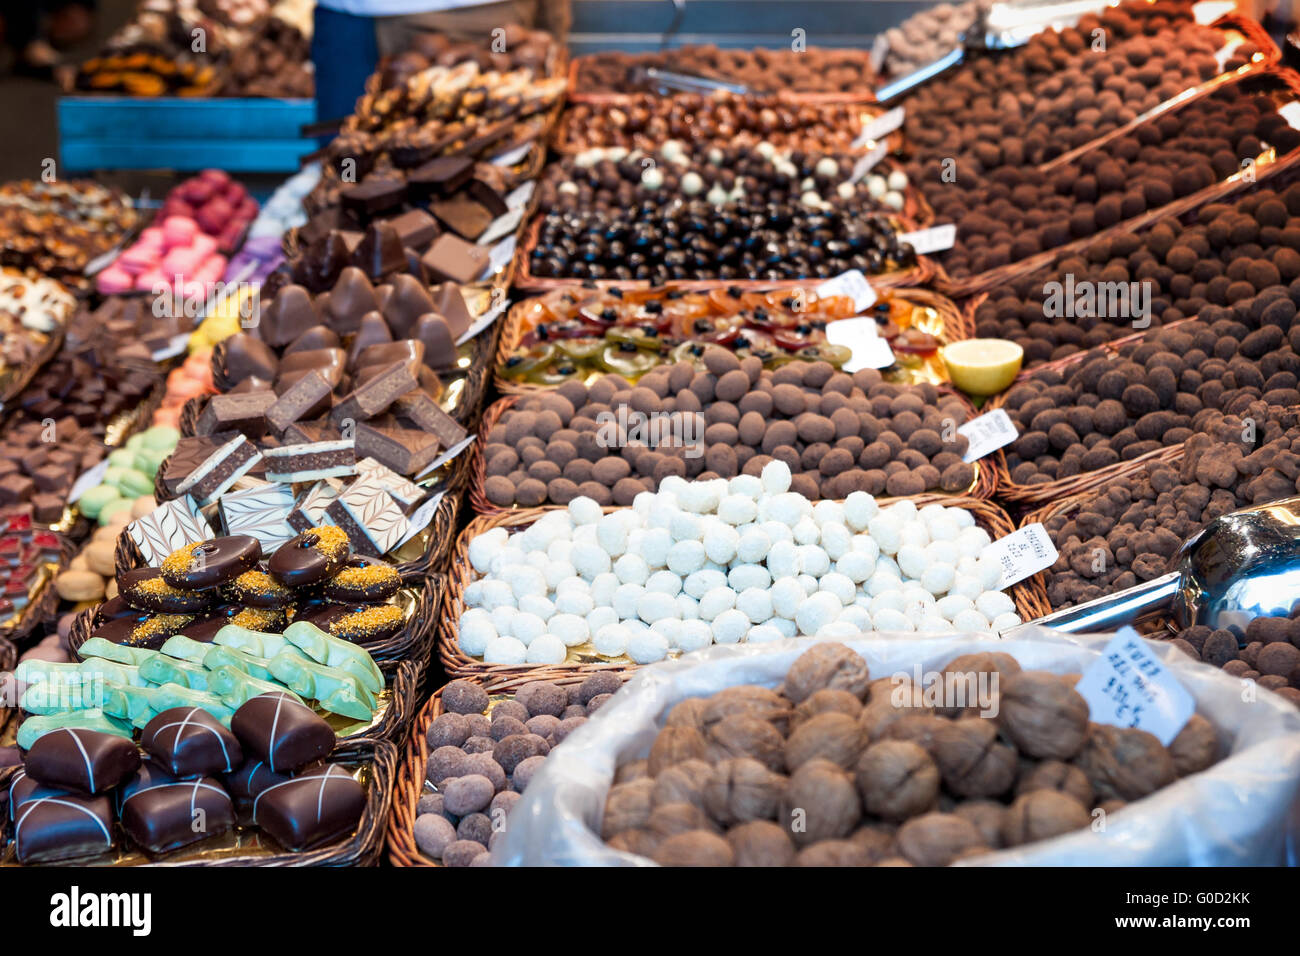 Selection of Spanish sweets in baskets at a market Stock Photo